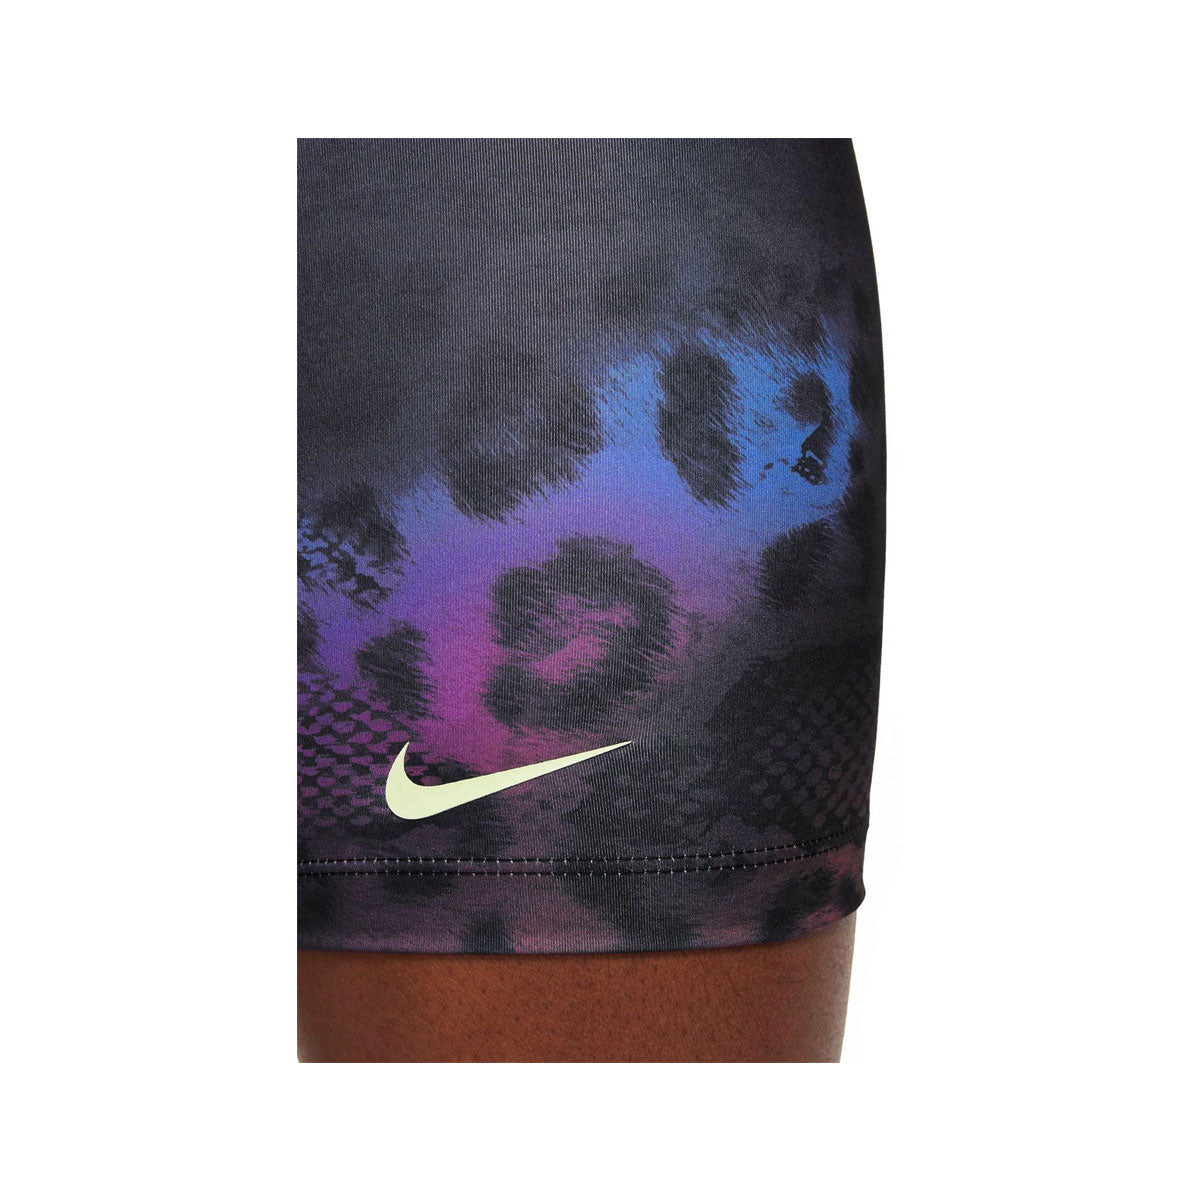 Nike Women's One 7-Inch Training Shorts Multi-Color Leopard Print